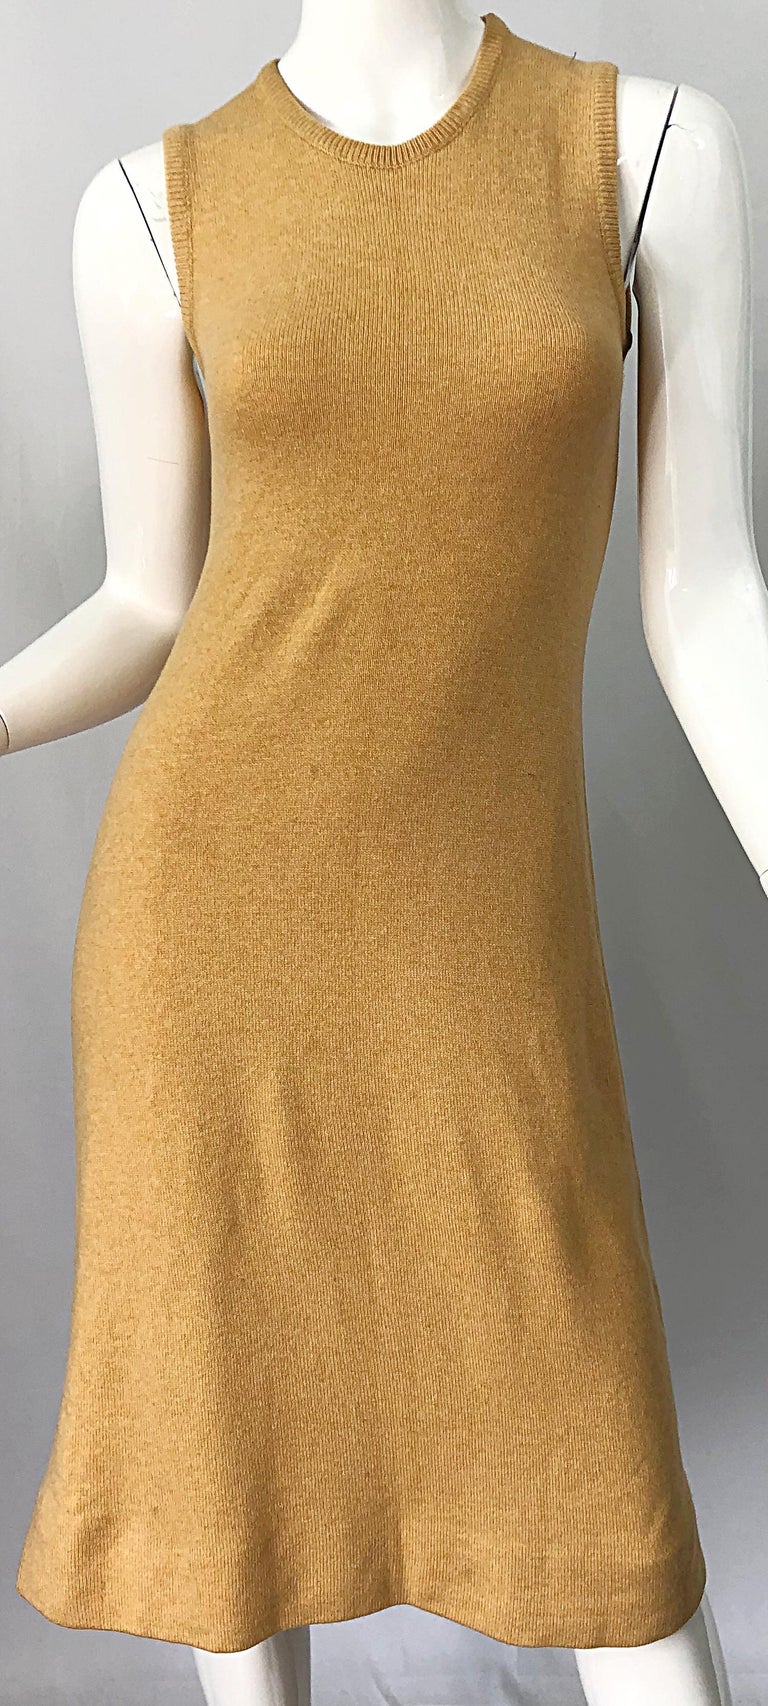 1970s HALSTON Cashmere Camel Tan 70s Vintage Dress and Cardigan Sweater Jacket For Sale 6